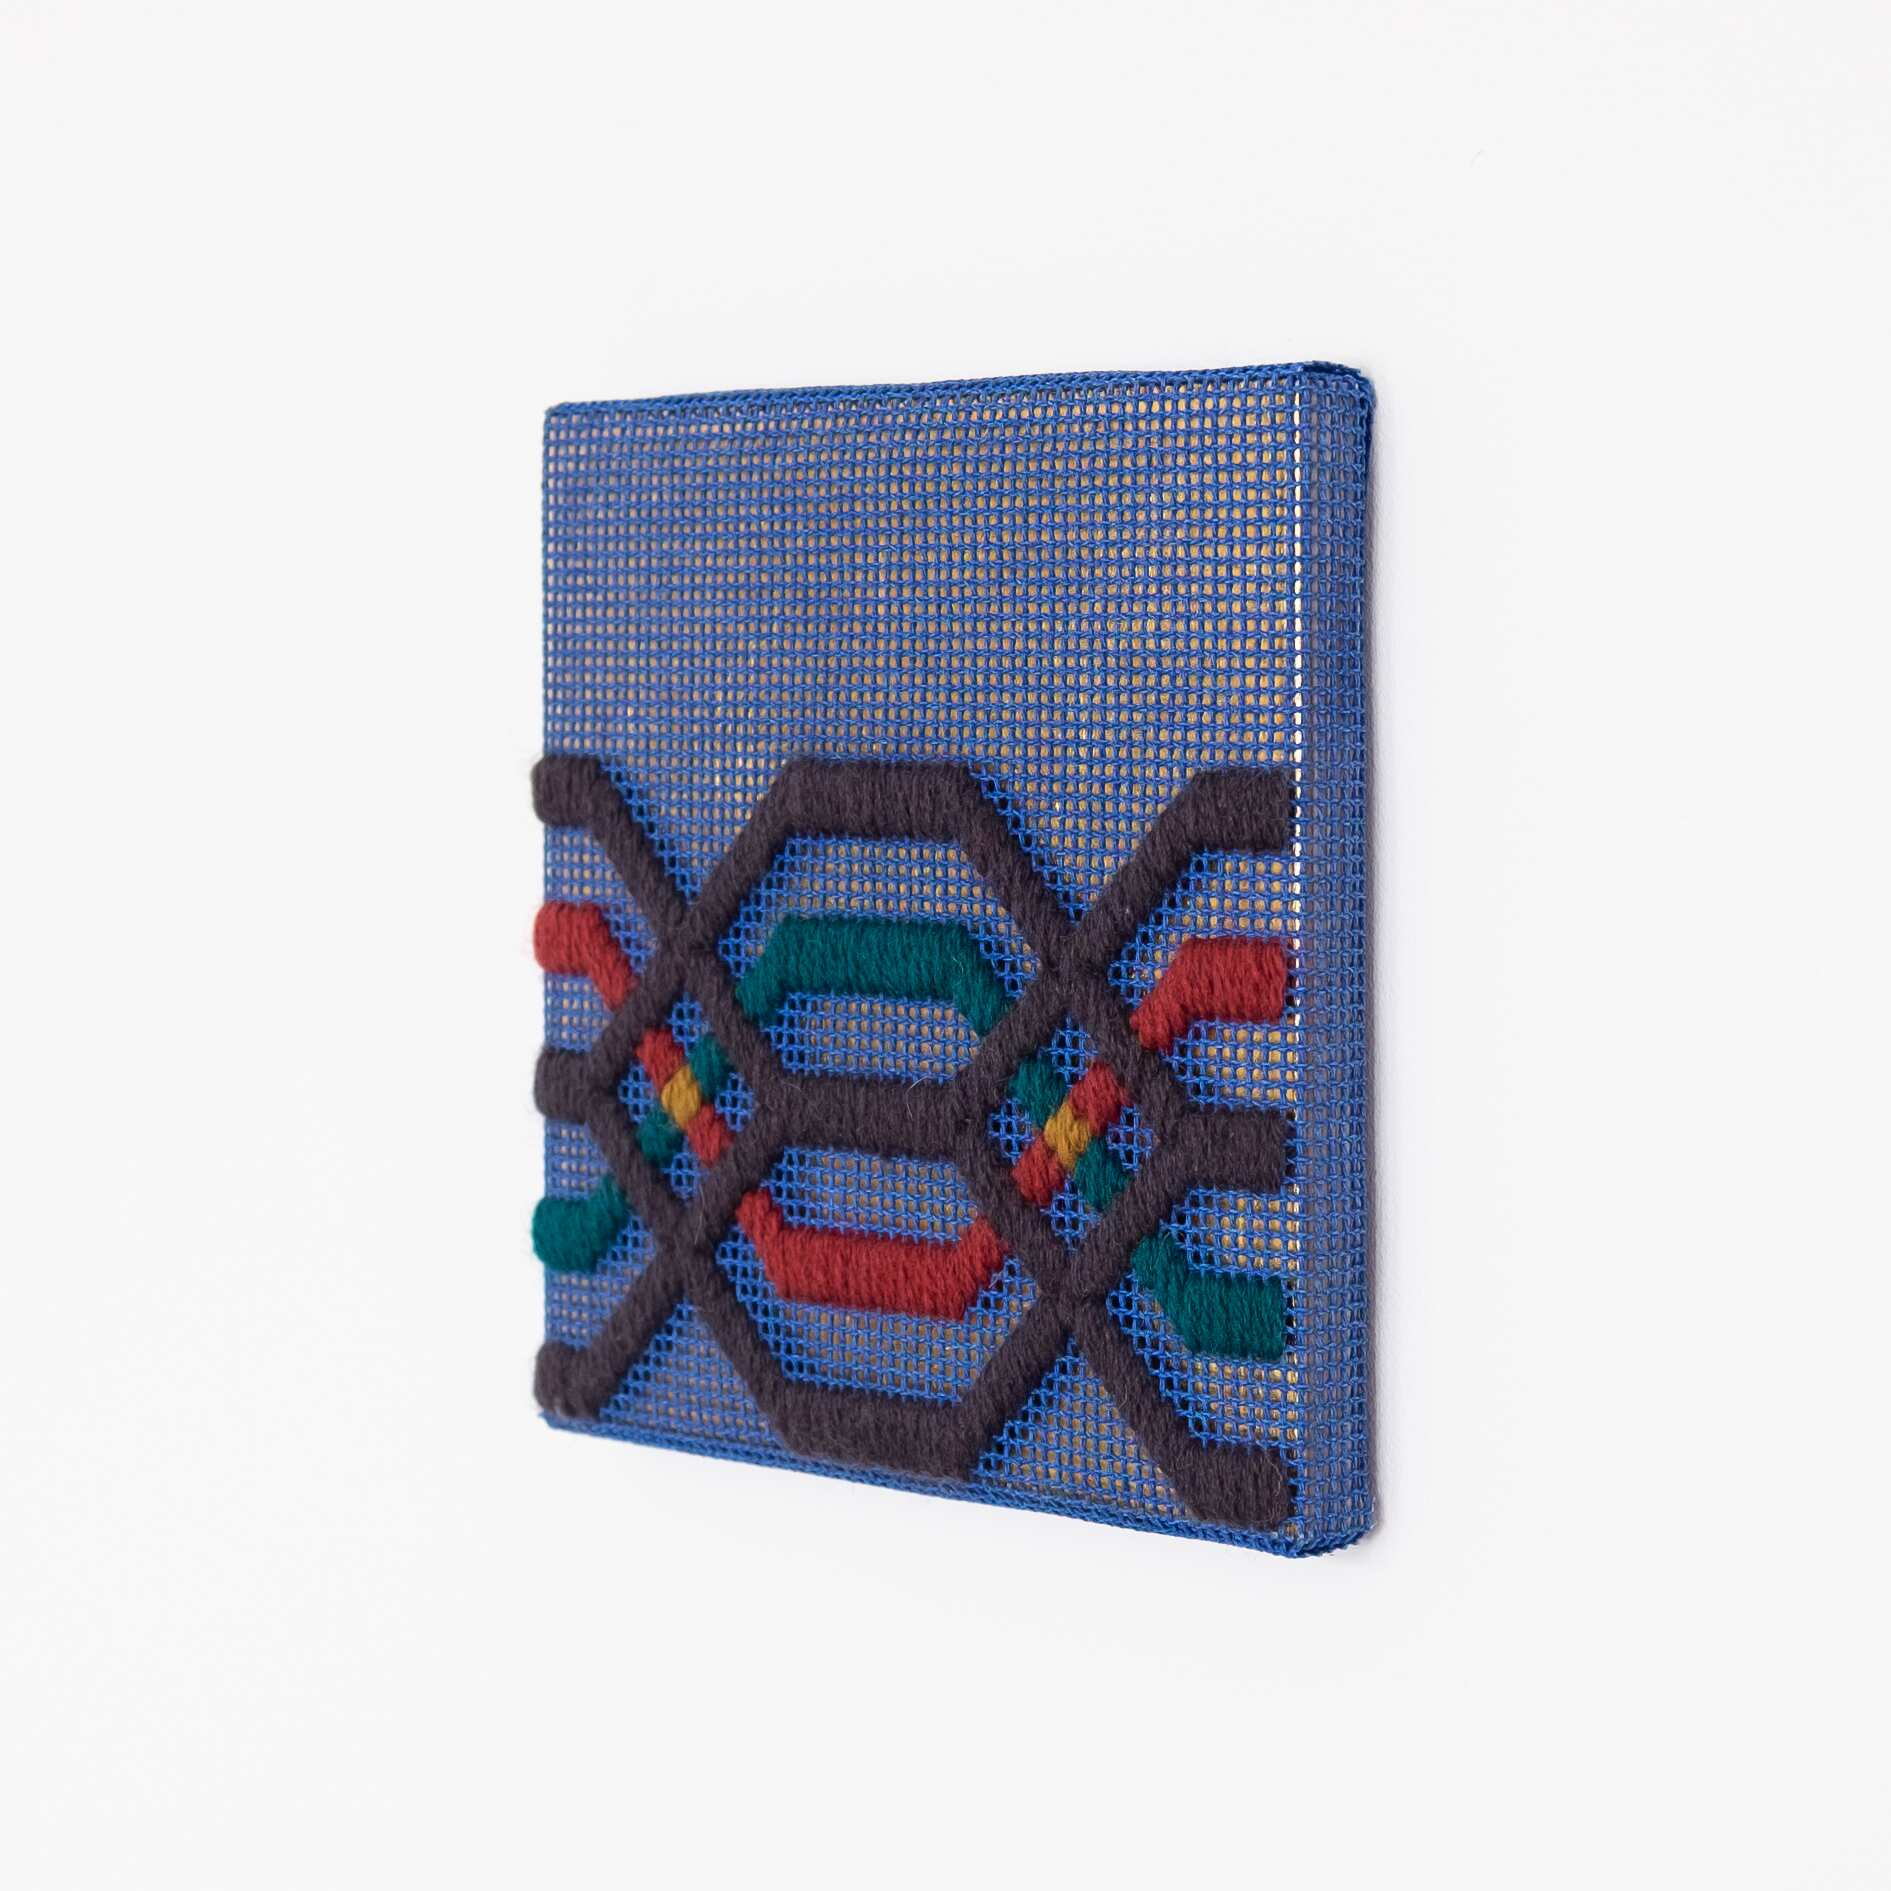 Border fragment [grey-teal-maroon on navy], Hand-embroidered wool thread and acrylic paint on canvas over gilded panel, 2021